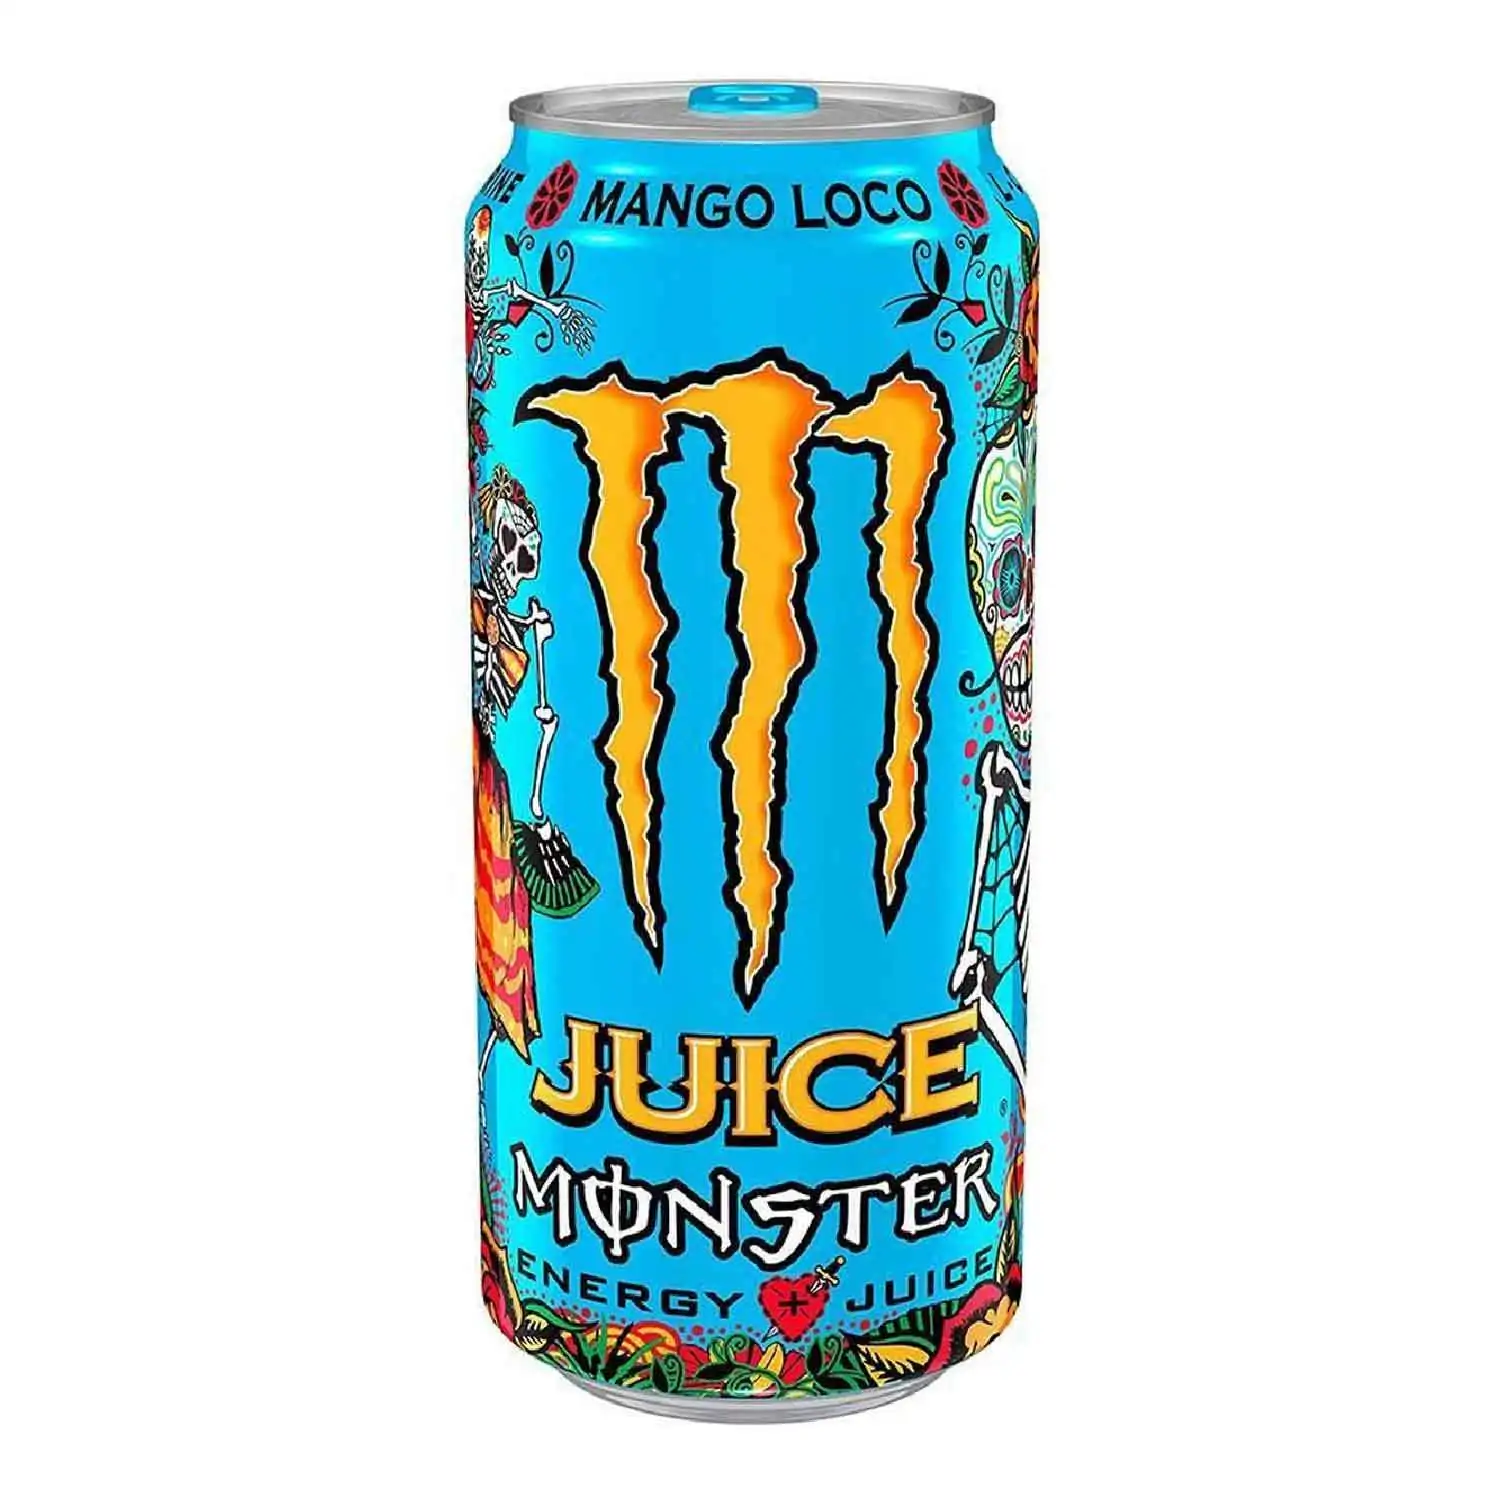 Monster juiced mango loco 50cl - Buy at Real Tobacco